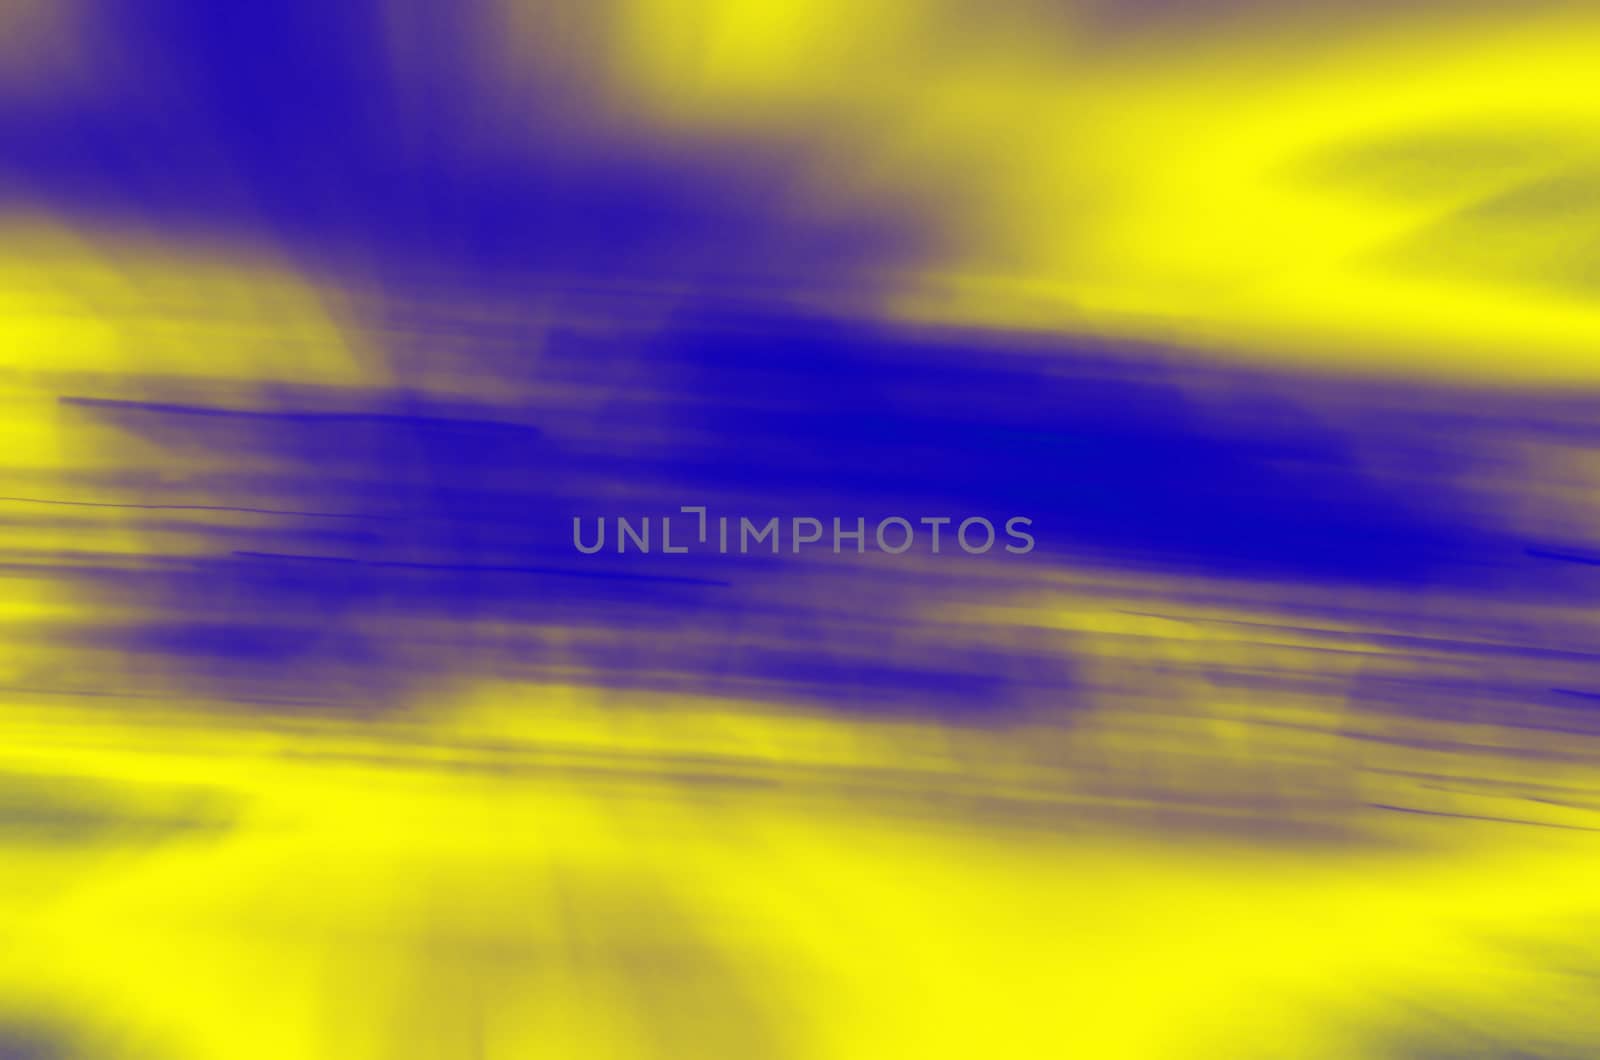 Blue and yellow background, blur stripes in the middle.